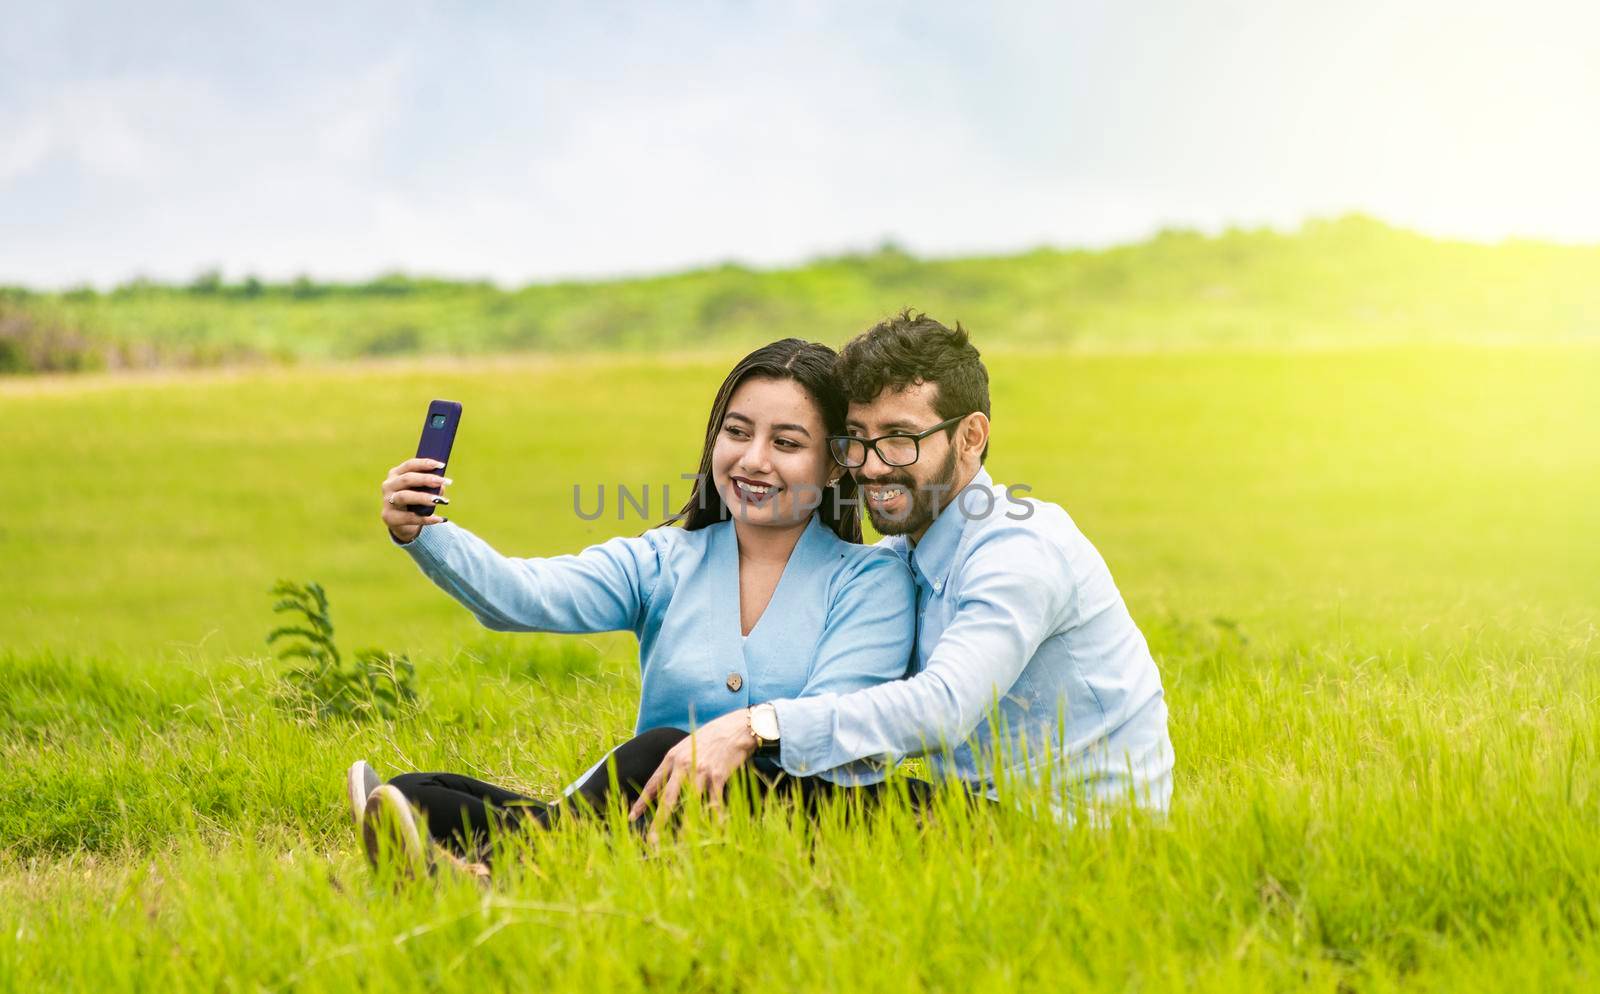 Smiling couple in love sitting on the grass taking selfies, Young couple in love taking a selfie in the field, People in love taking selfies in the field with their smartphone